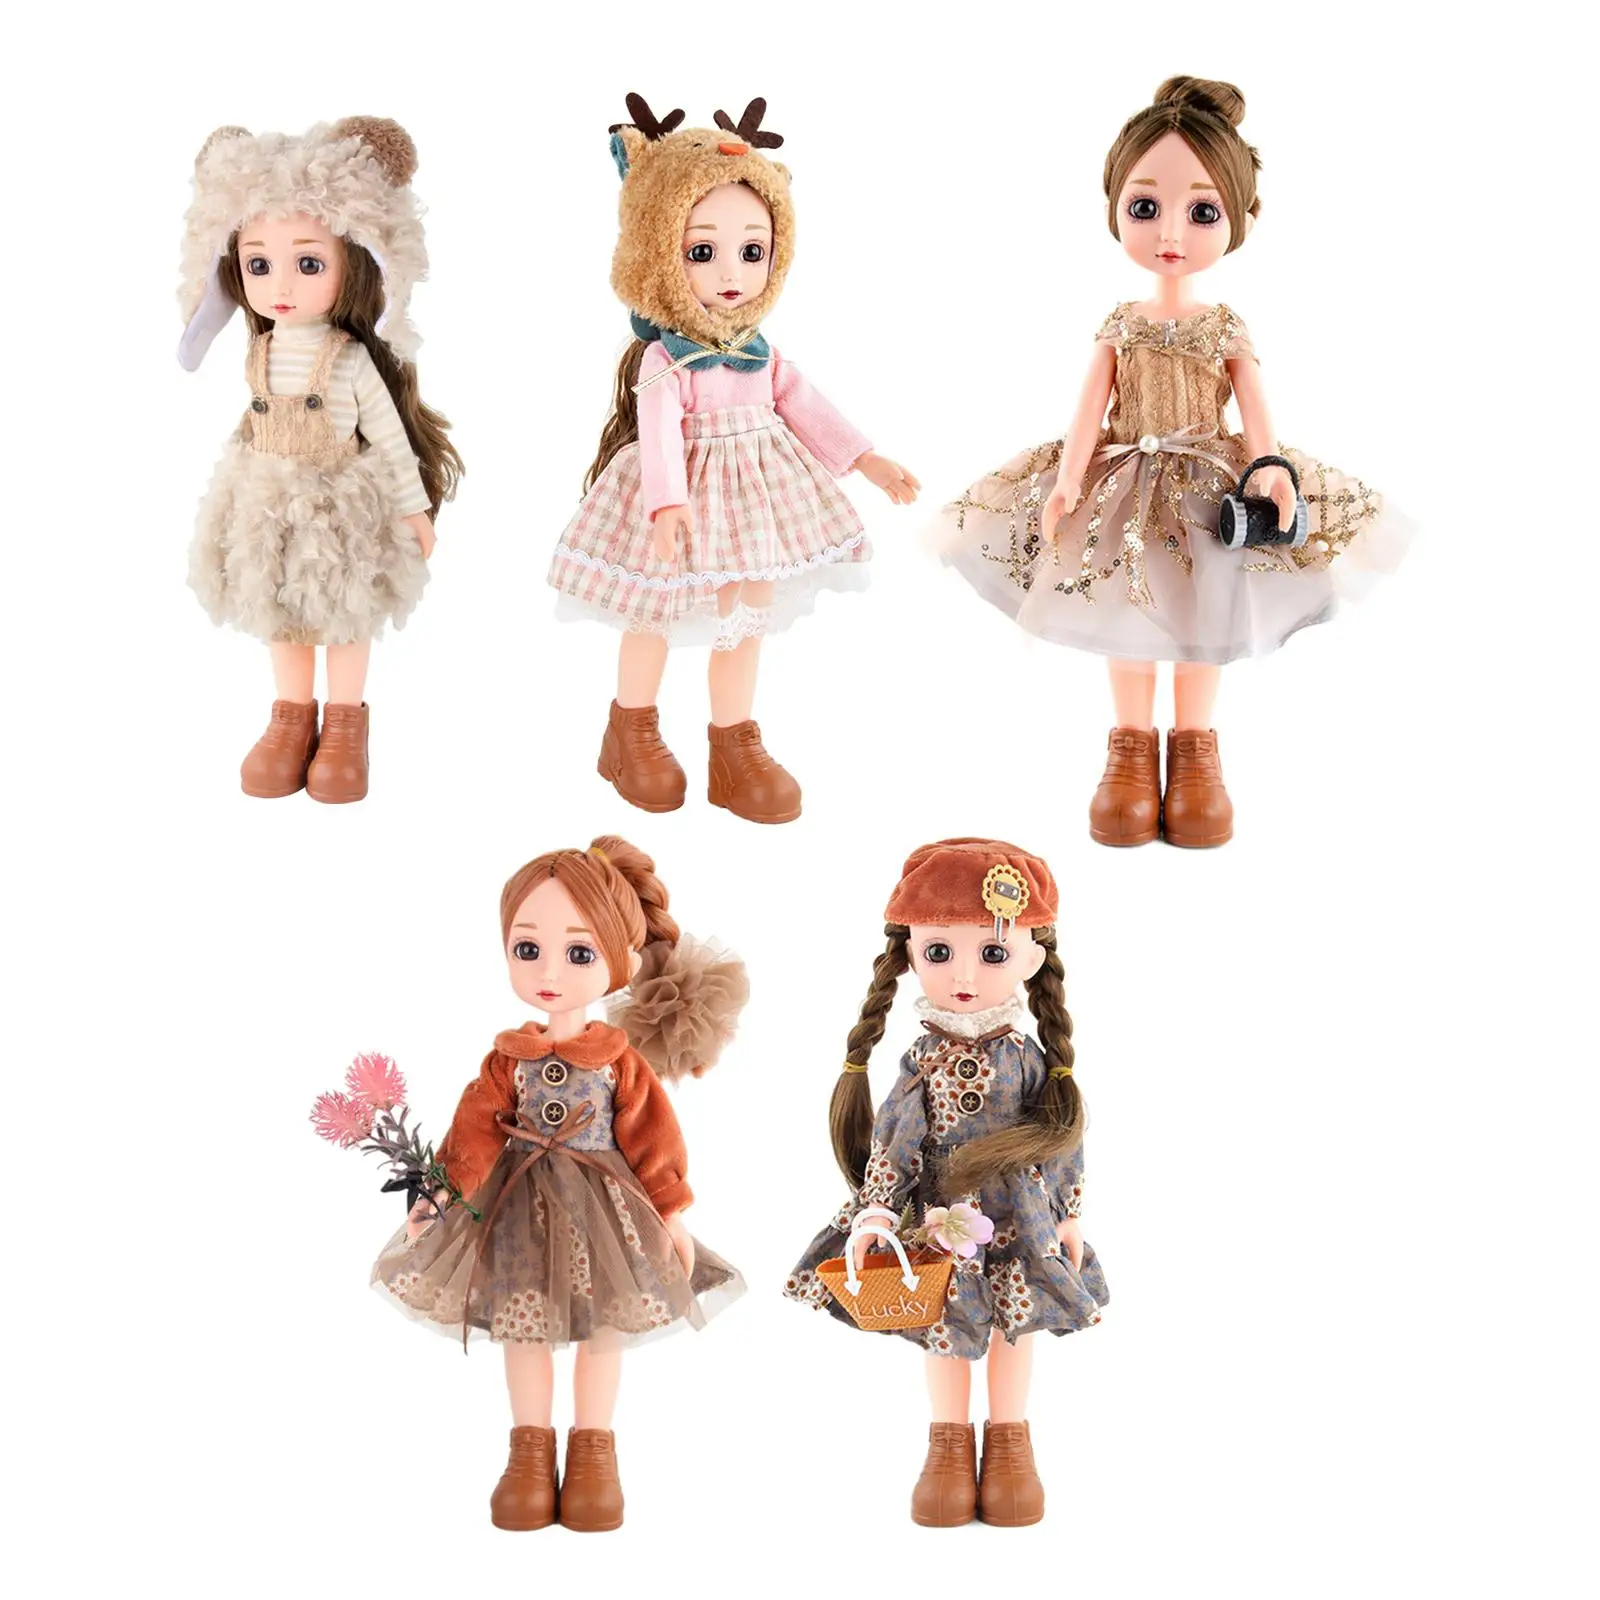 Cute Baby Doll Princess Doll Collection Outfit Fashion Dress 30cm Girl Doll for Girls